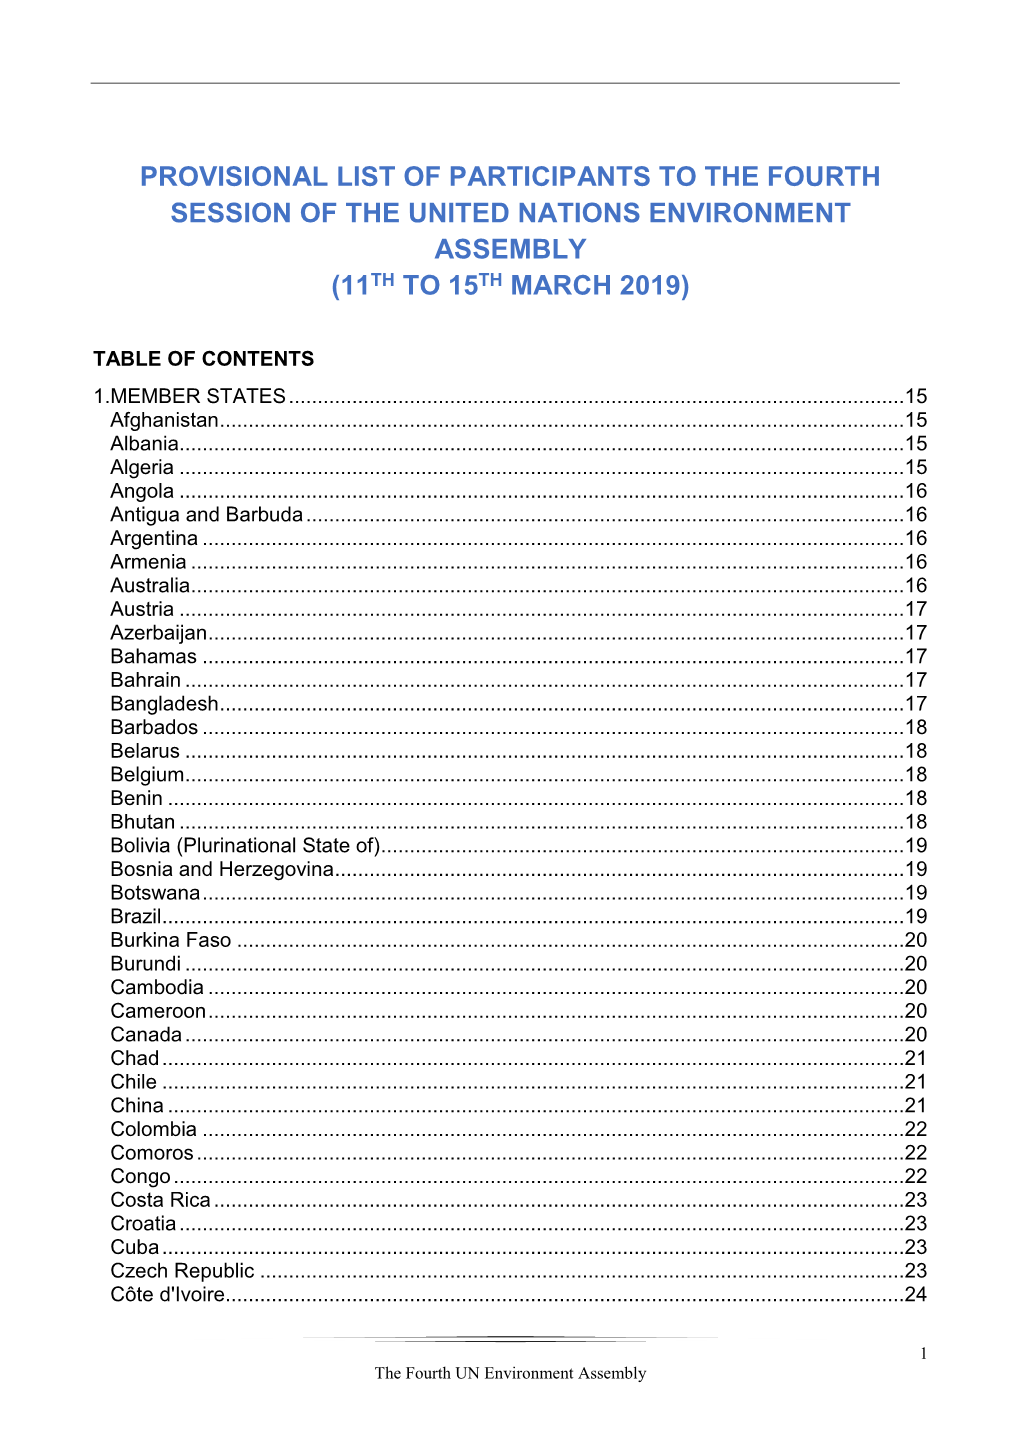 Provisional List of Participants to the Fourth Session of the United Nations Environment Assembly (11Th to 15Th March 2019)